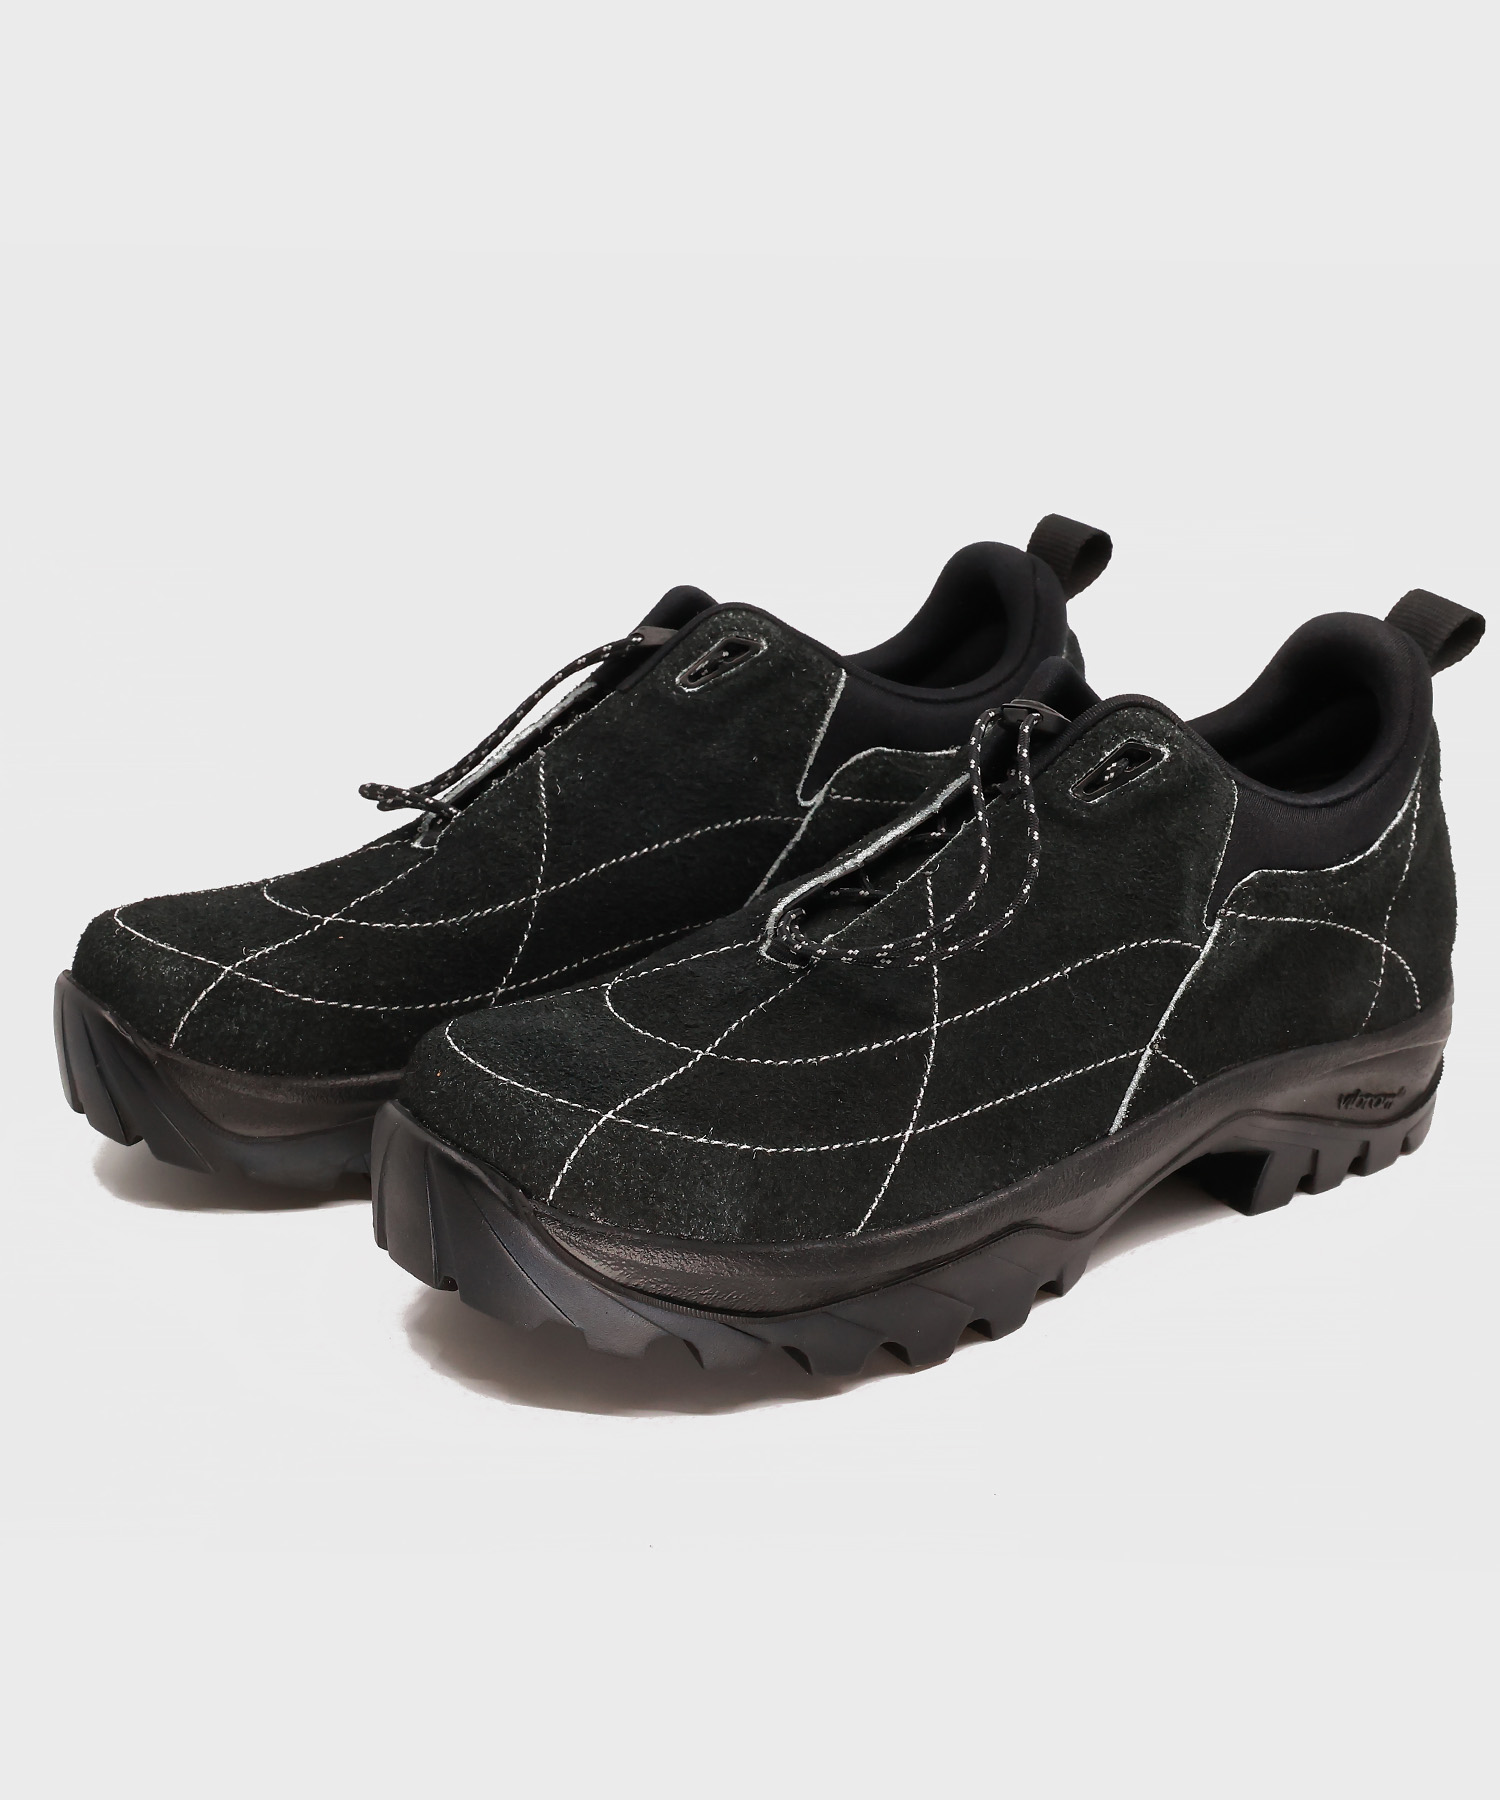 Forest Hiking Shoes Black